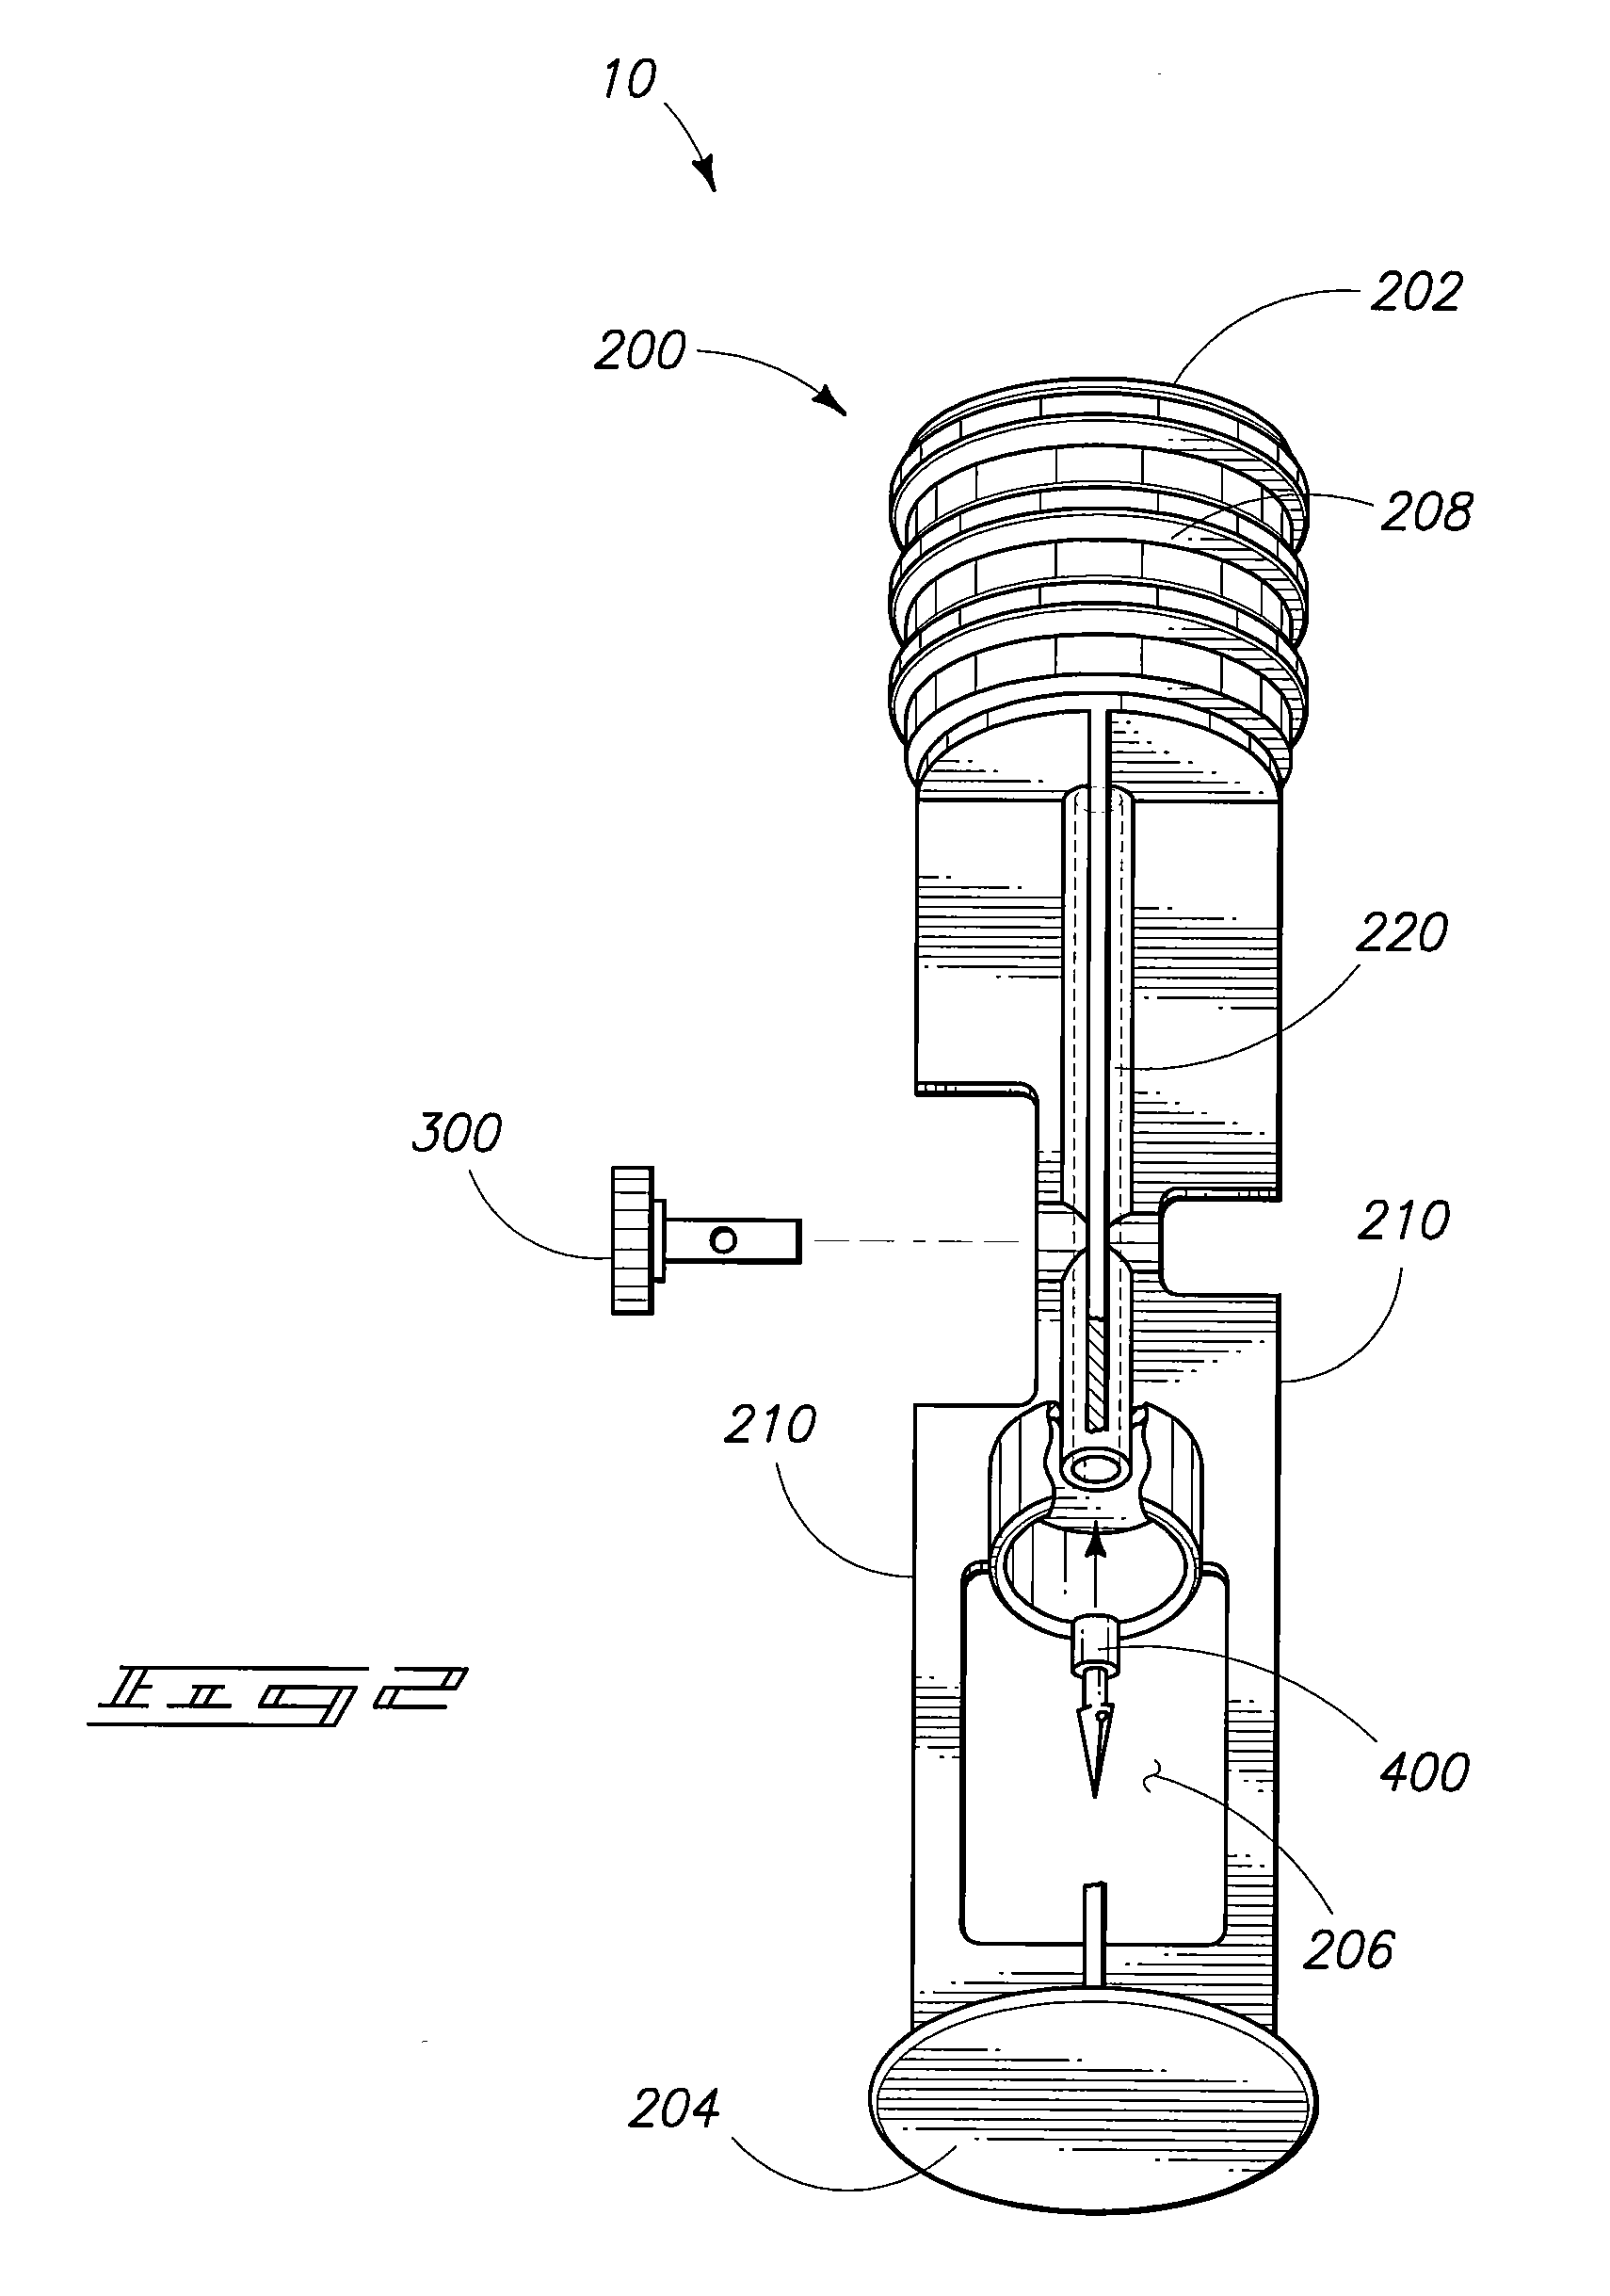 Syringe Devices, Components of Syringe Devices, and Methods of Forming Components and Syringe Devices